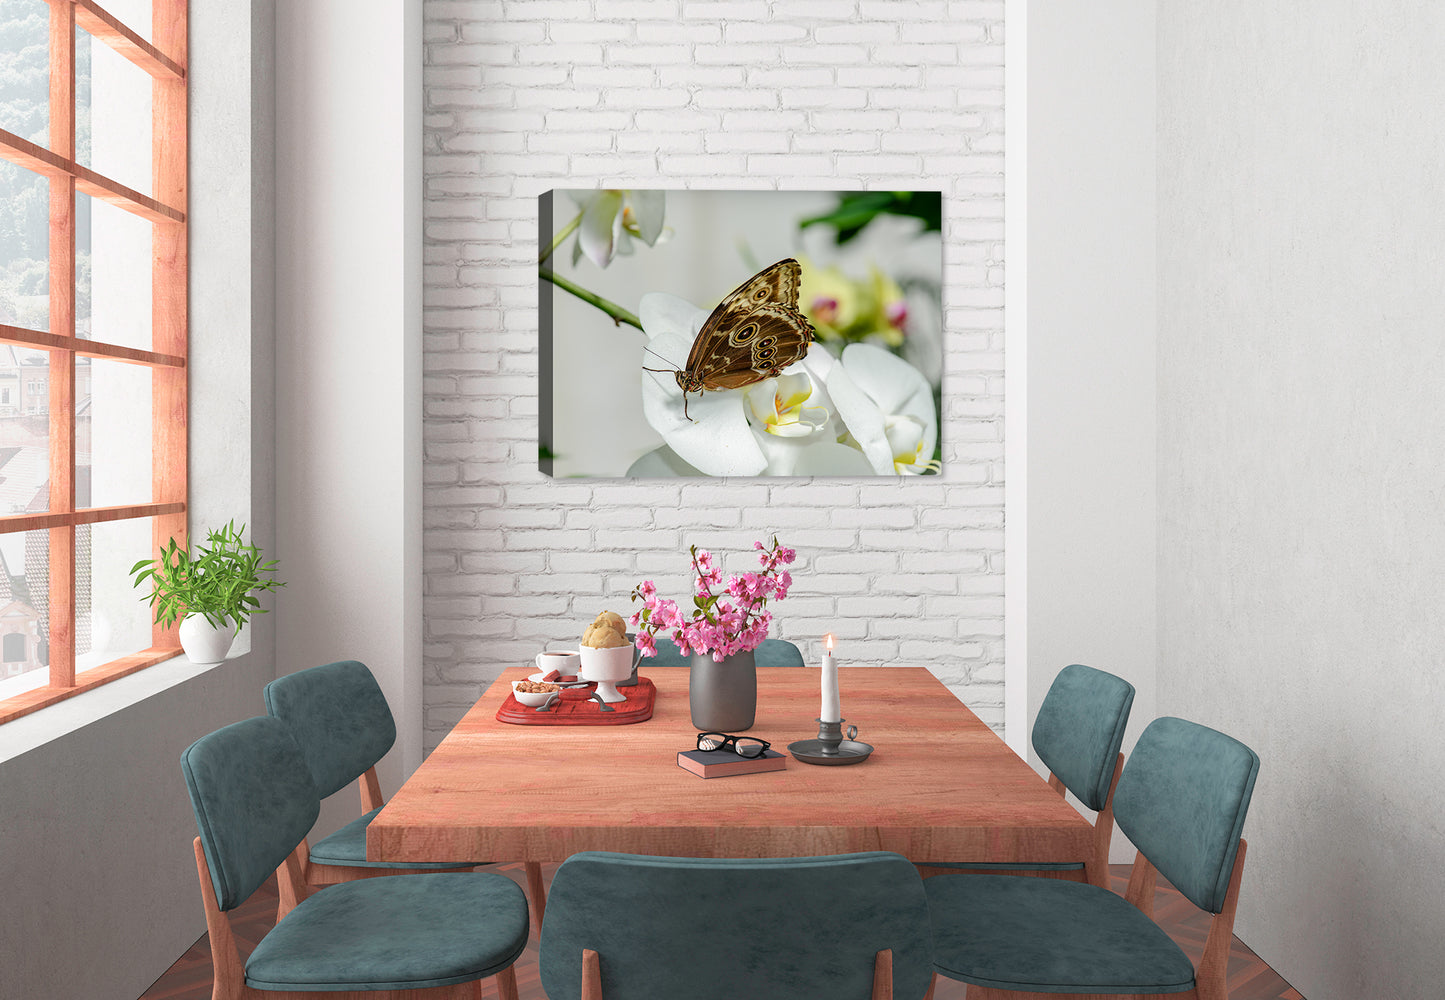 Monarch Butterfly on White Orchid - Fine Art Giclee